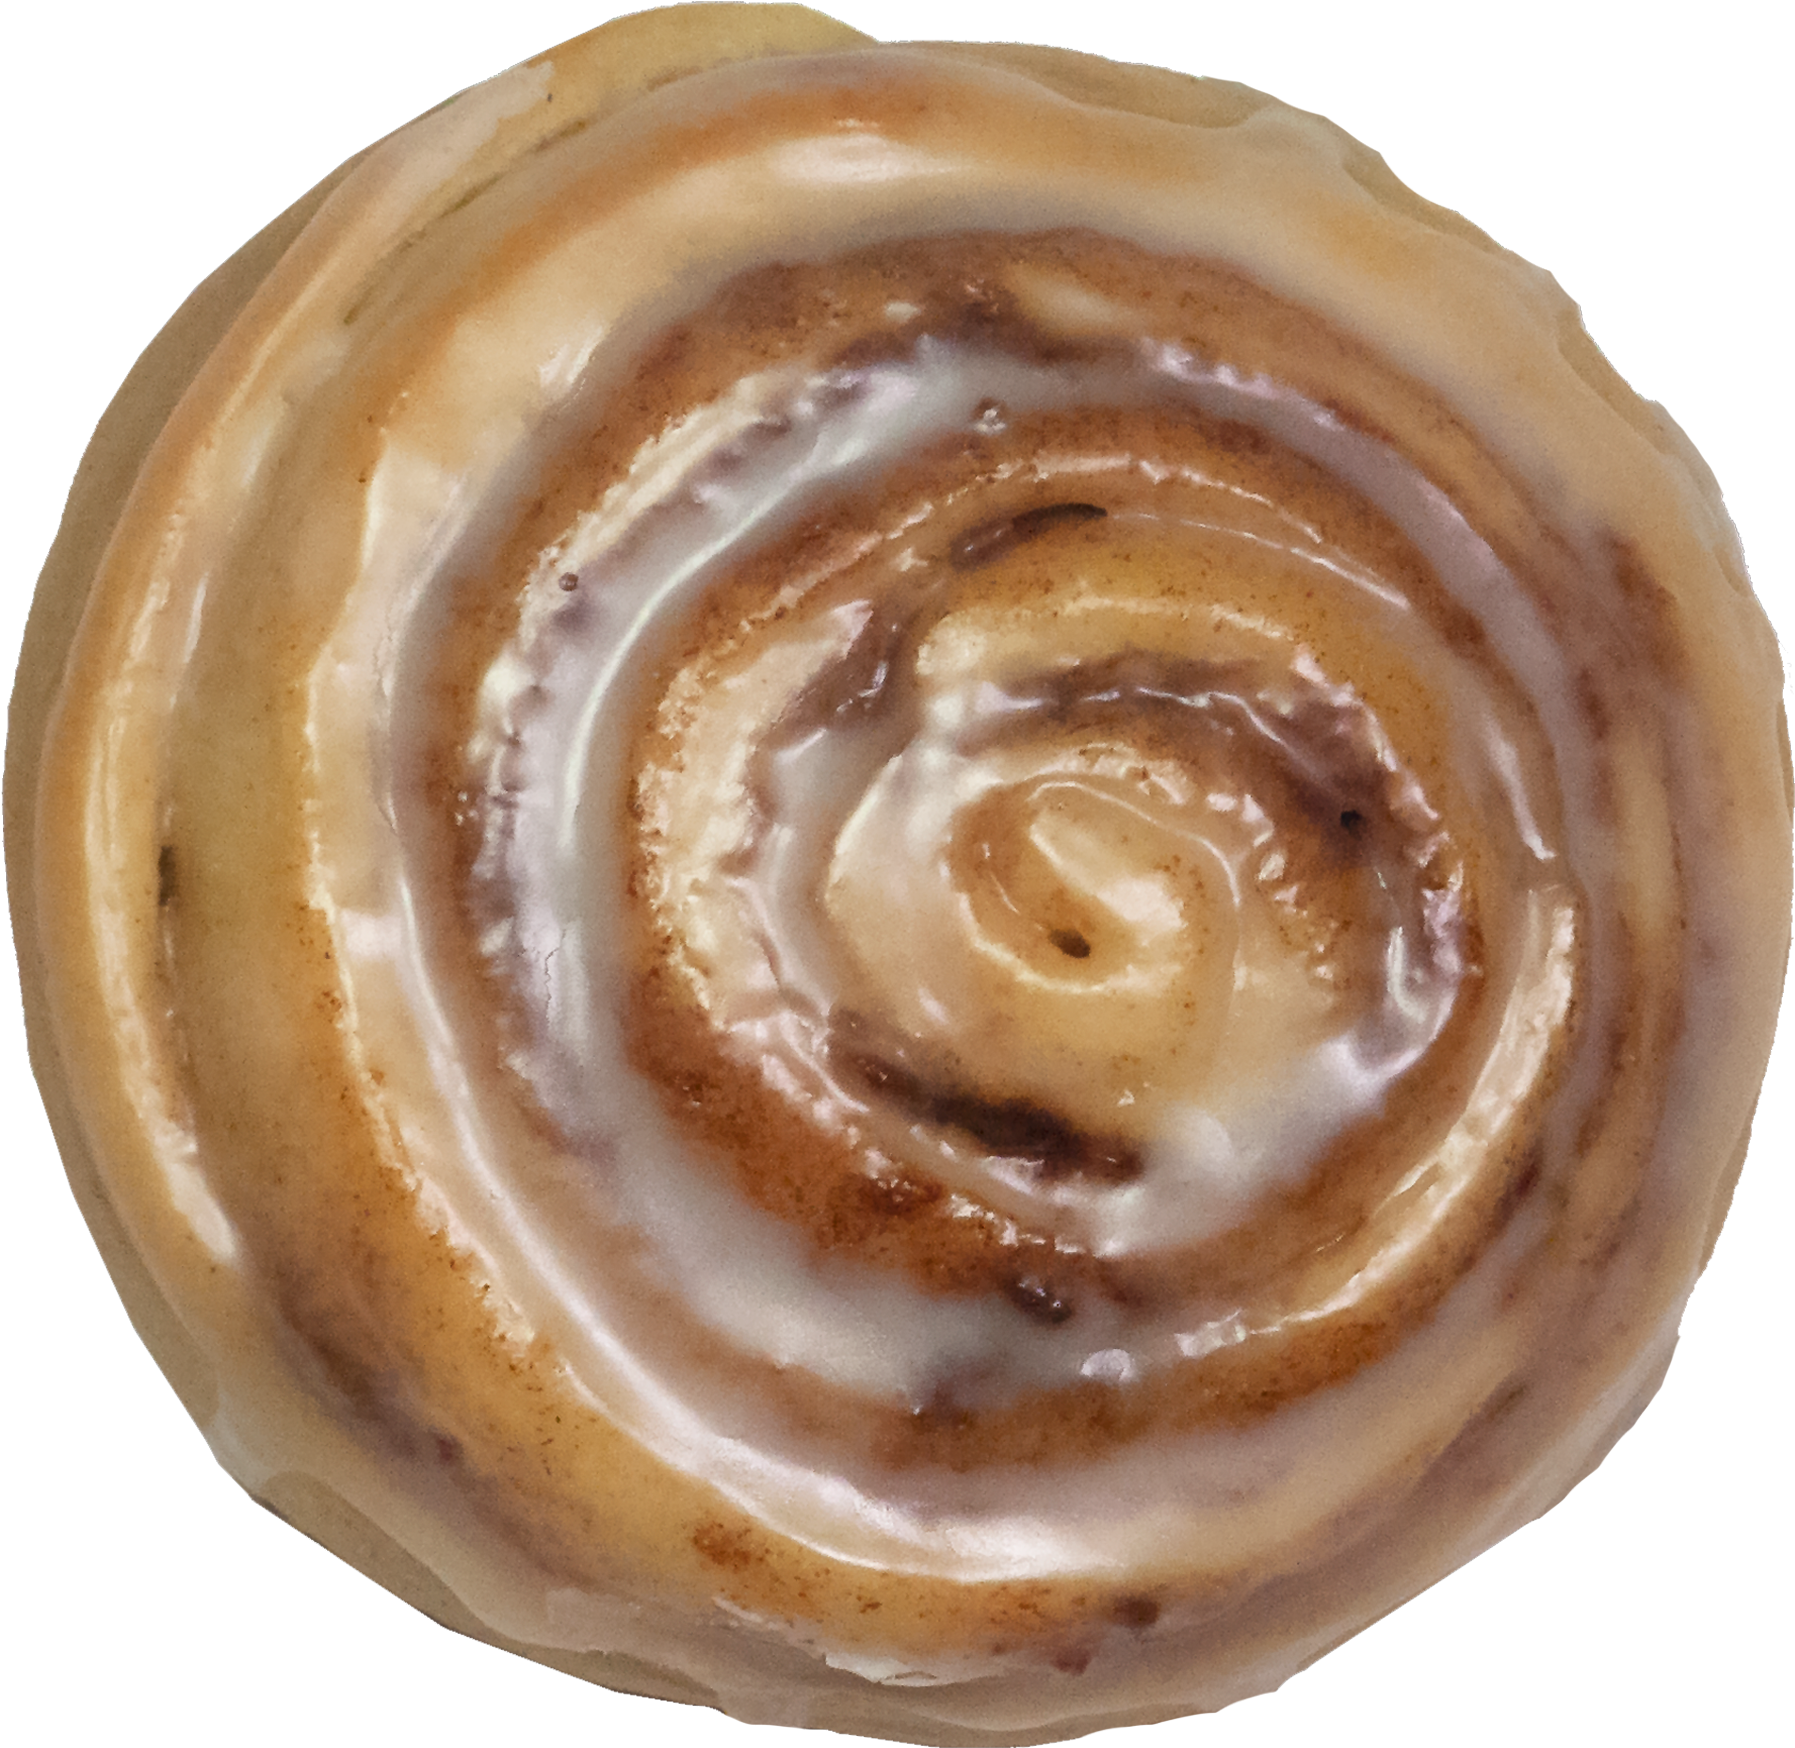 A Close Up Of A Cinnamon Roll